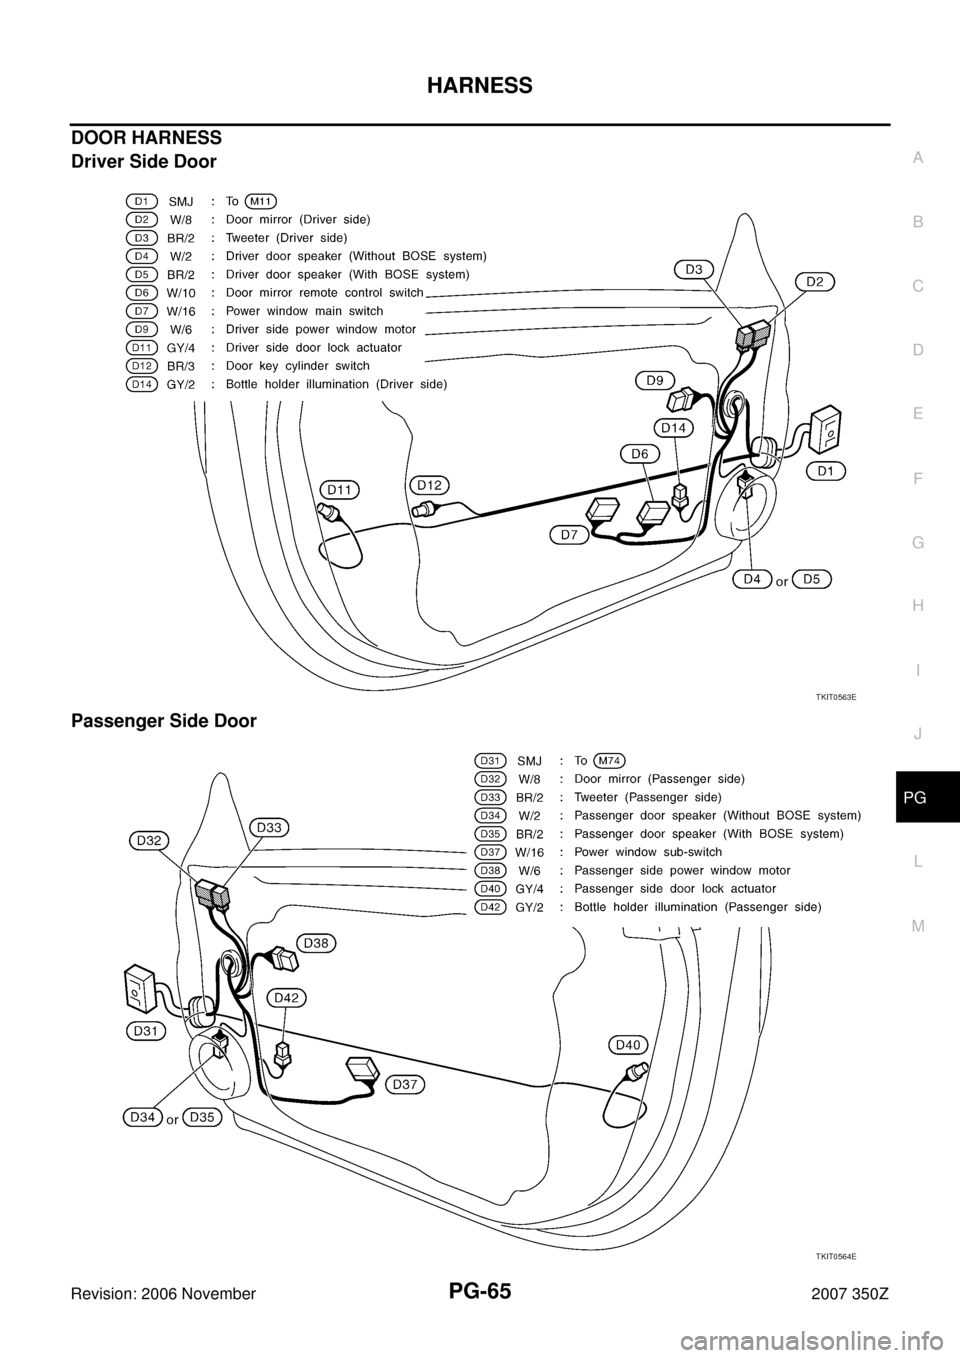 NISSAN 350Z 2007 Z33 Power Supply, Ground And Circuit Repair Manual HARNESS
PG-65
C
D
E
F
G
H
I
J
L
MA
B
PG
Revision: 2006 November2007 350Z
DOOR HARNESS 
Driver Side Door
Passenger Side Door
TKIT0563E
TKIT0564E 